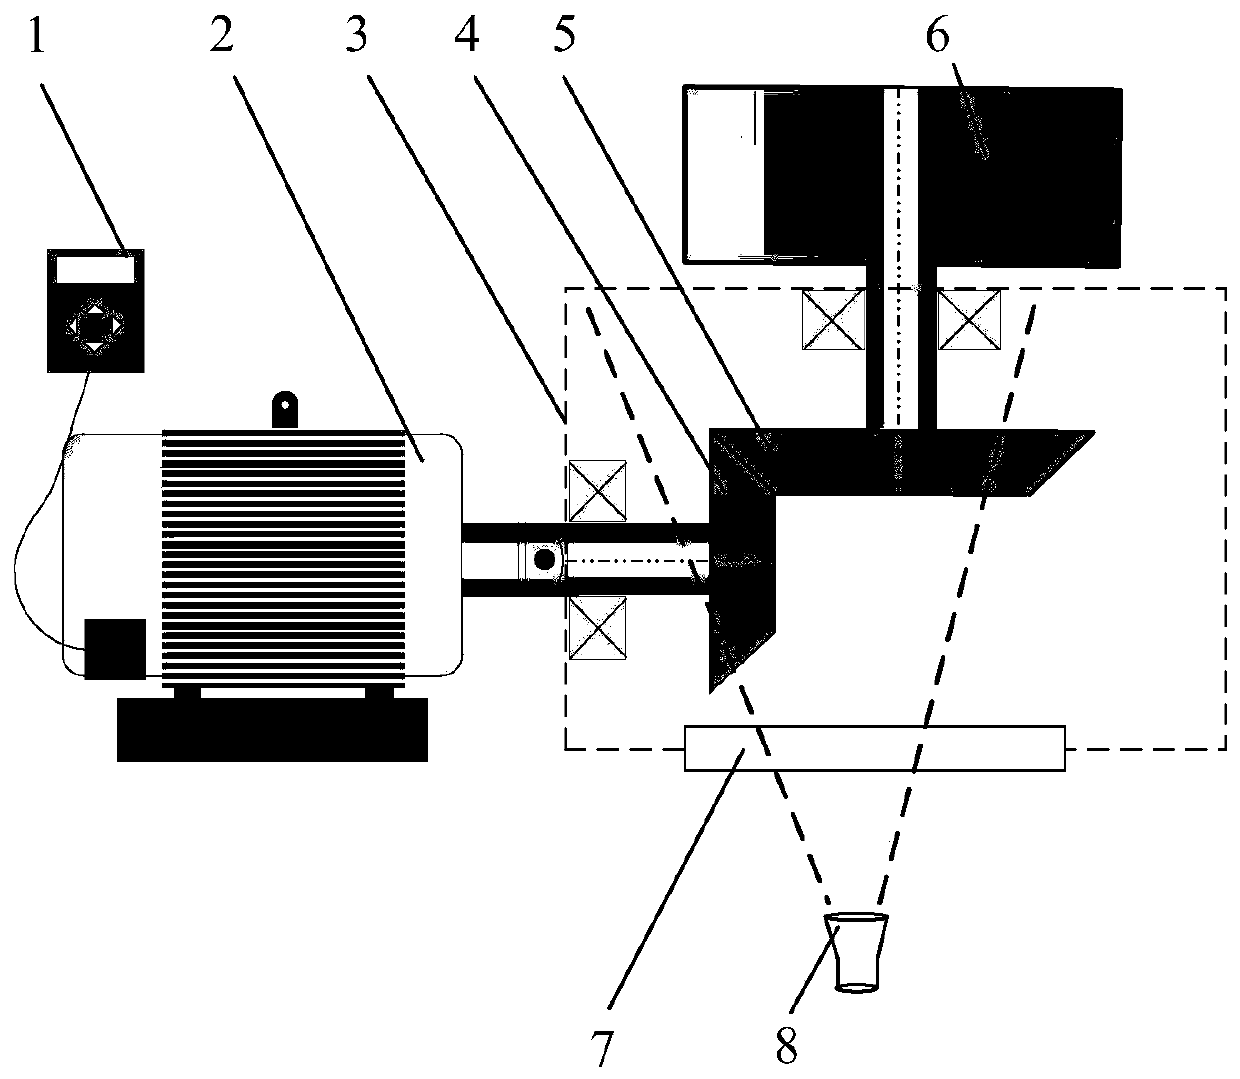 A Gearbox Fault Diagnosis Method Based on Infrared Thermal Imaging